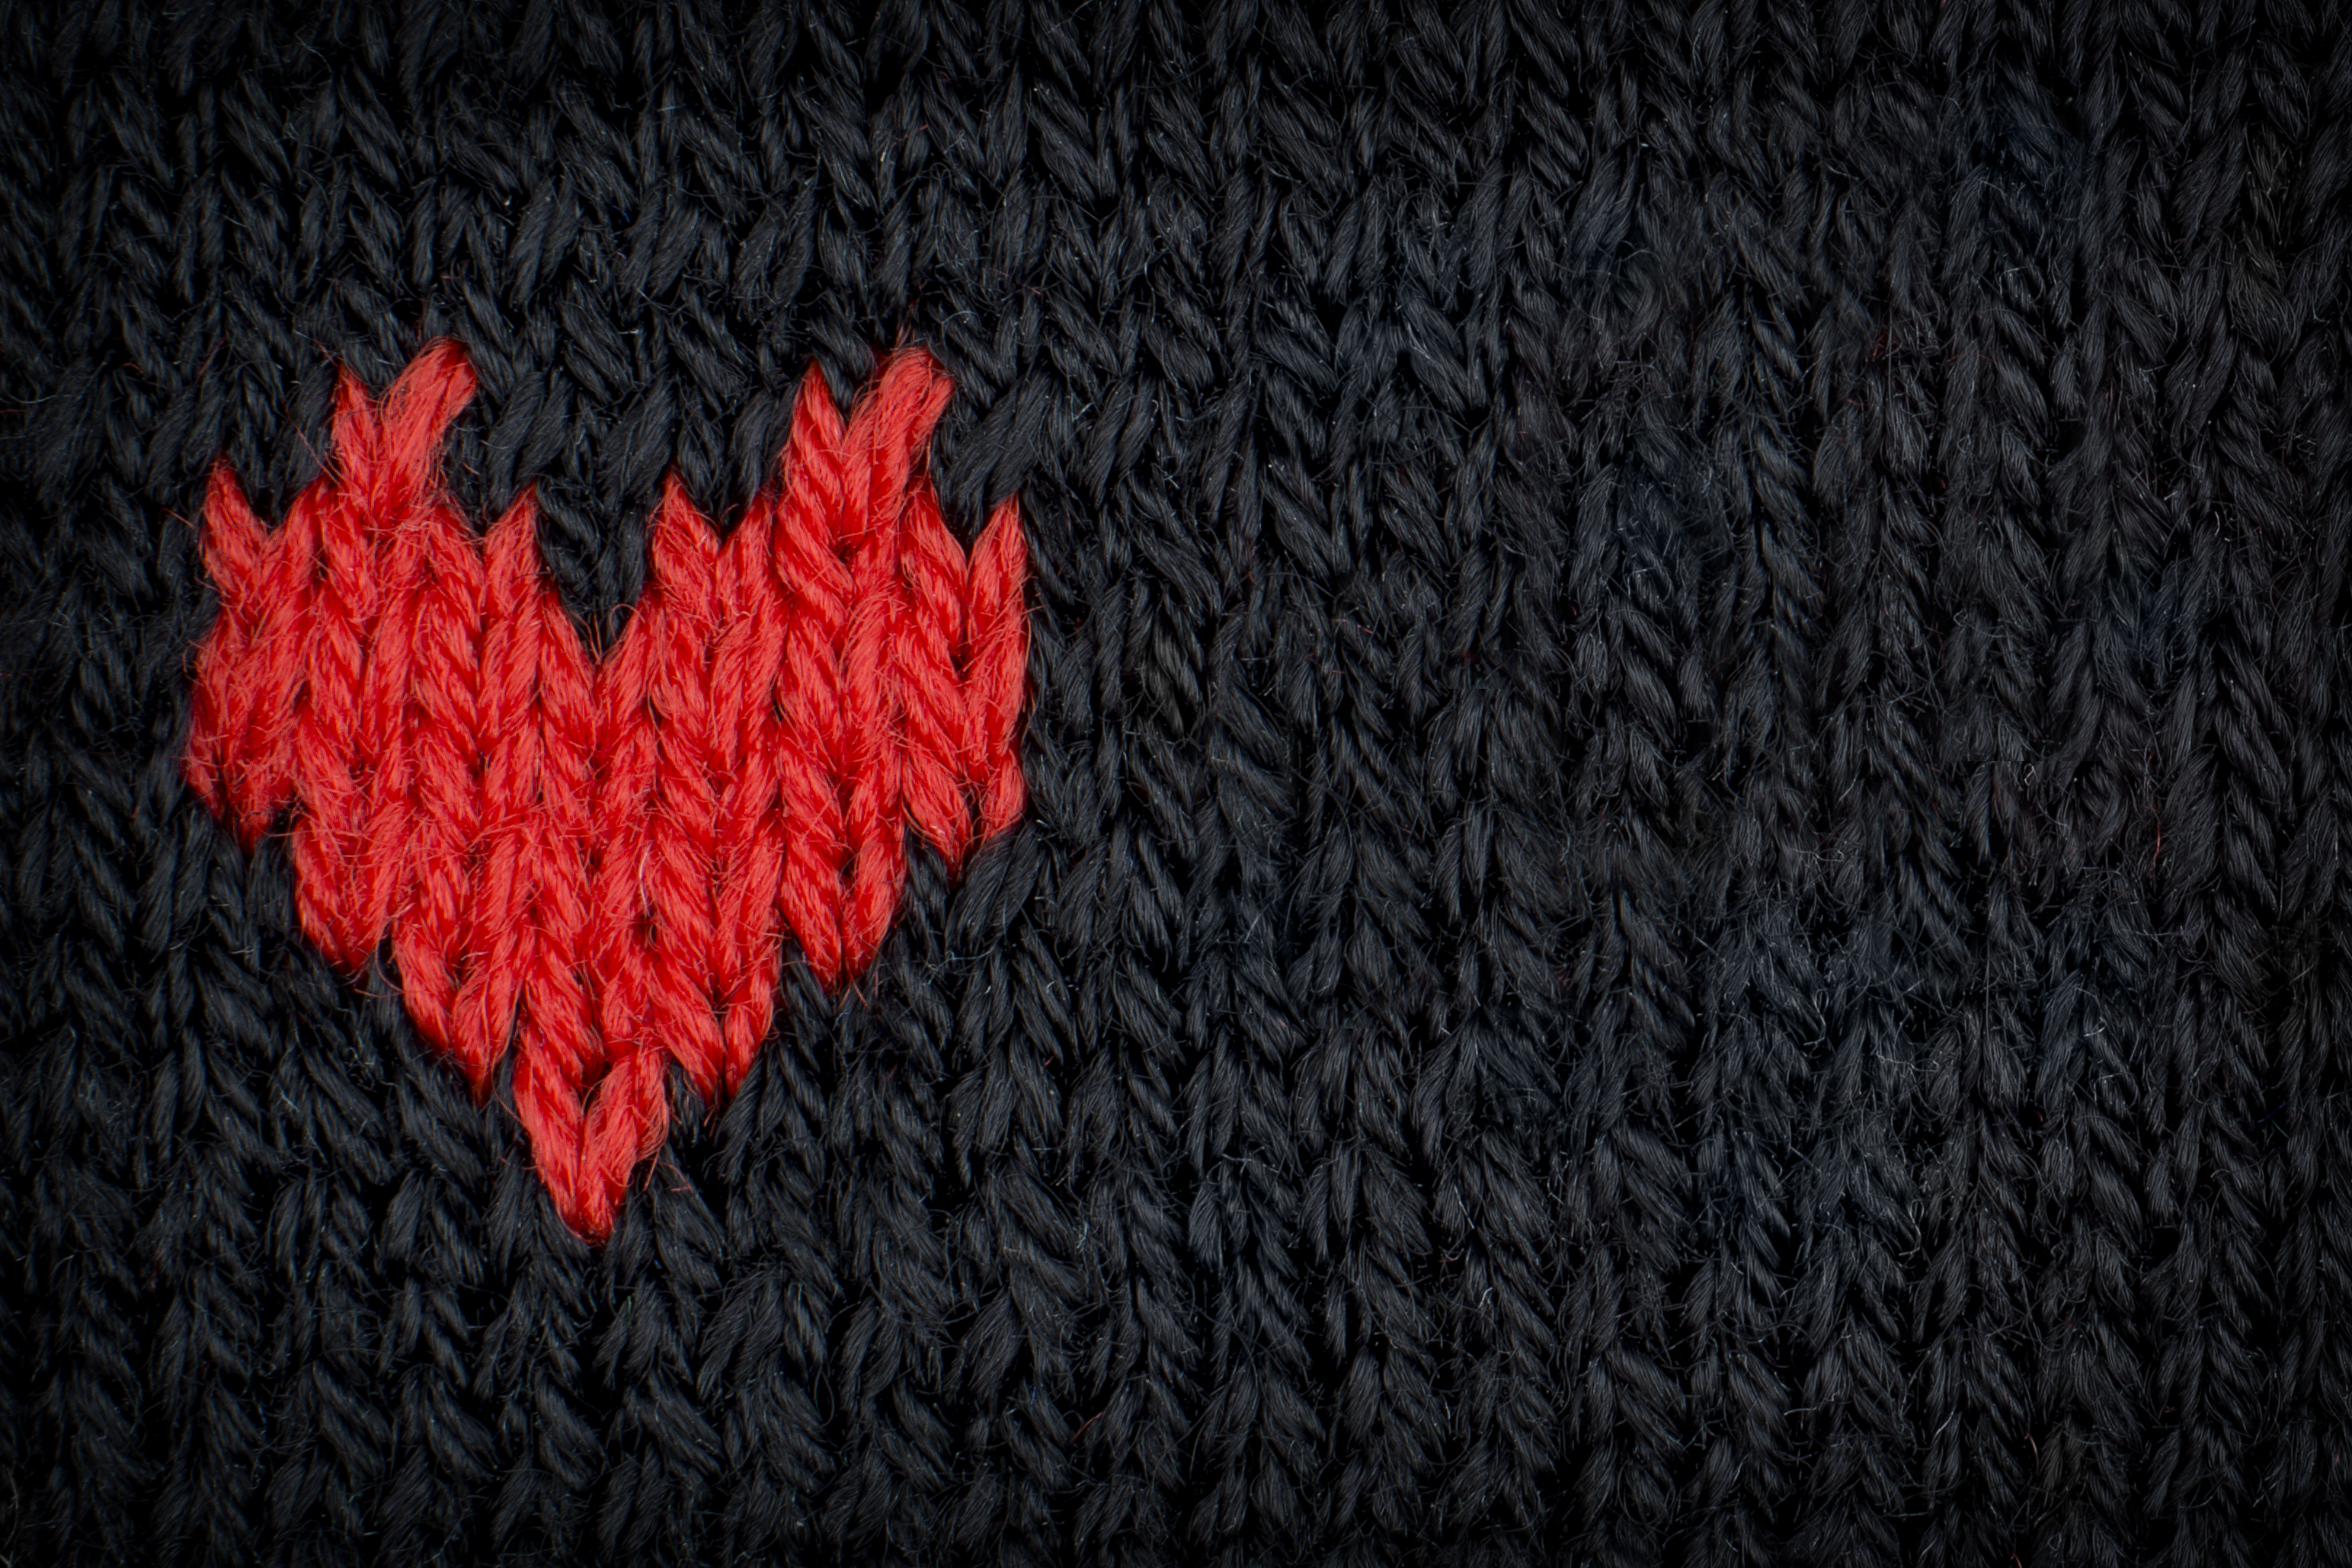 Ravelry Patterns Knitting The Power Of Ravelrys Stance Against White Supremacy Reaches Beyond